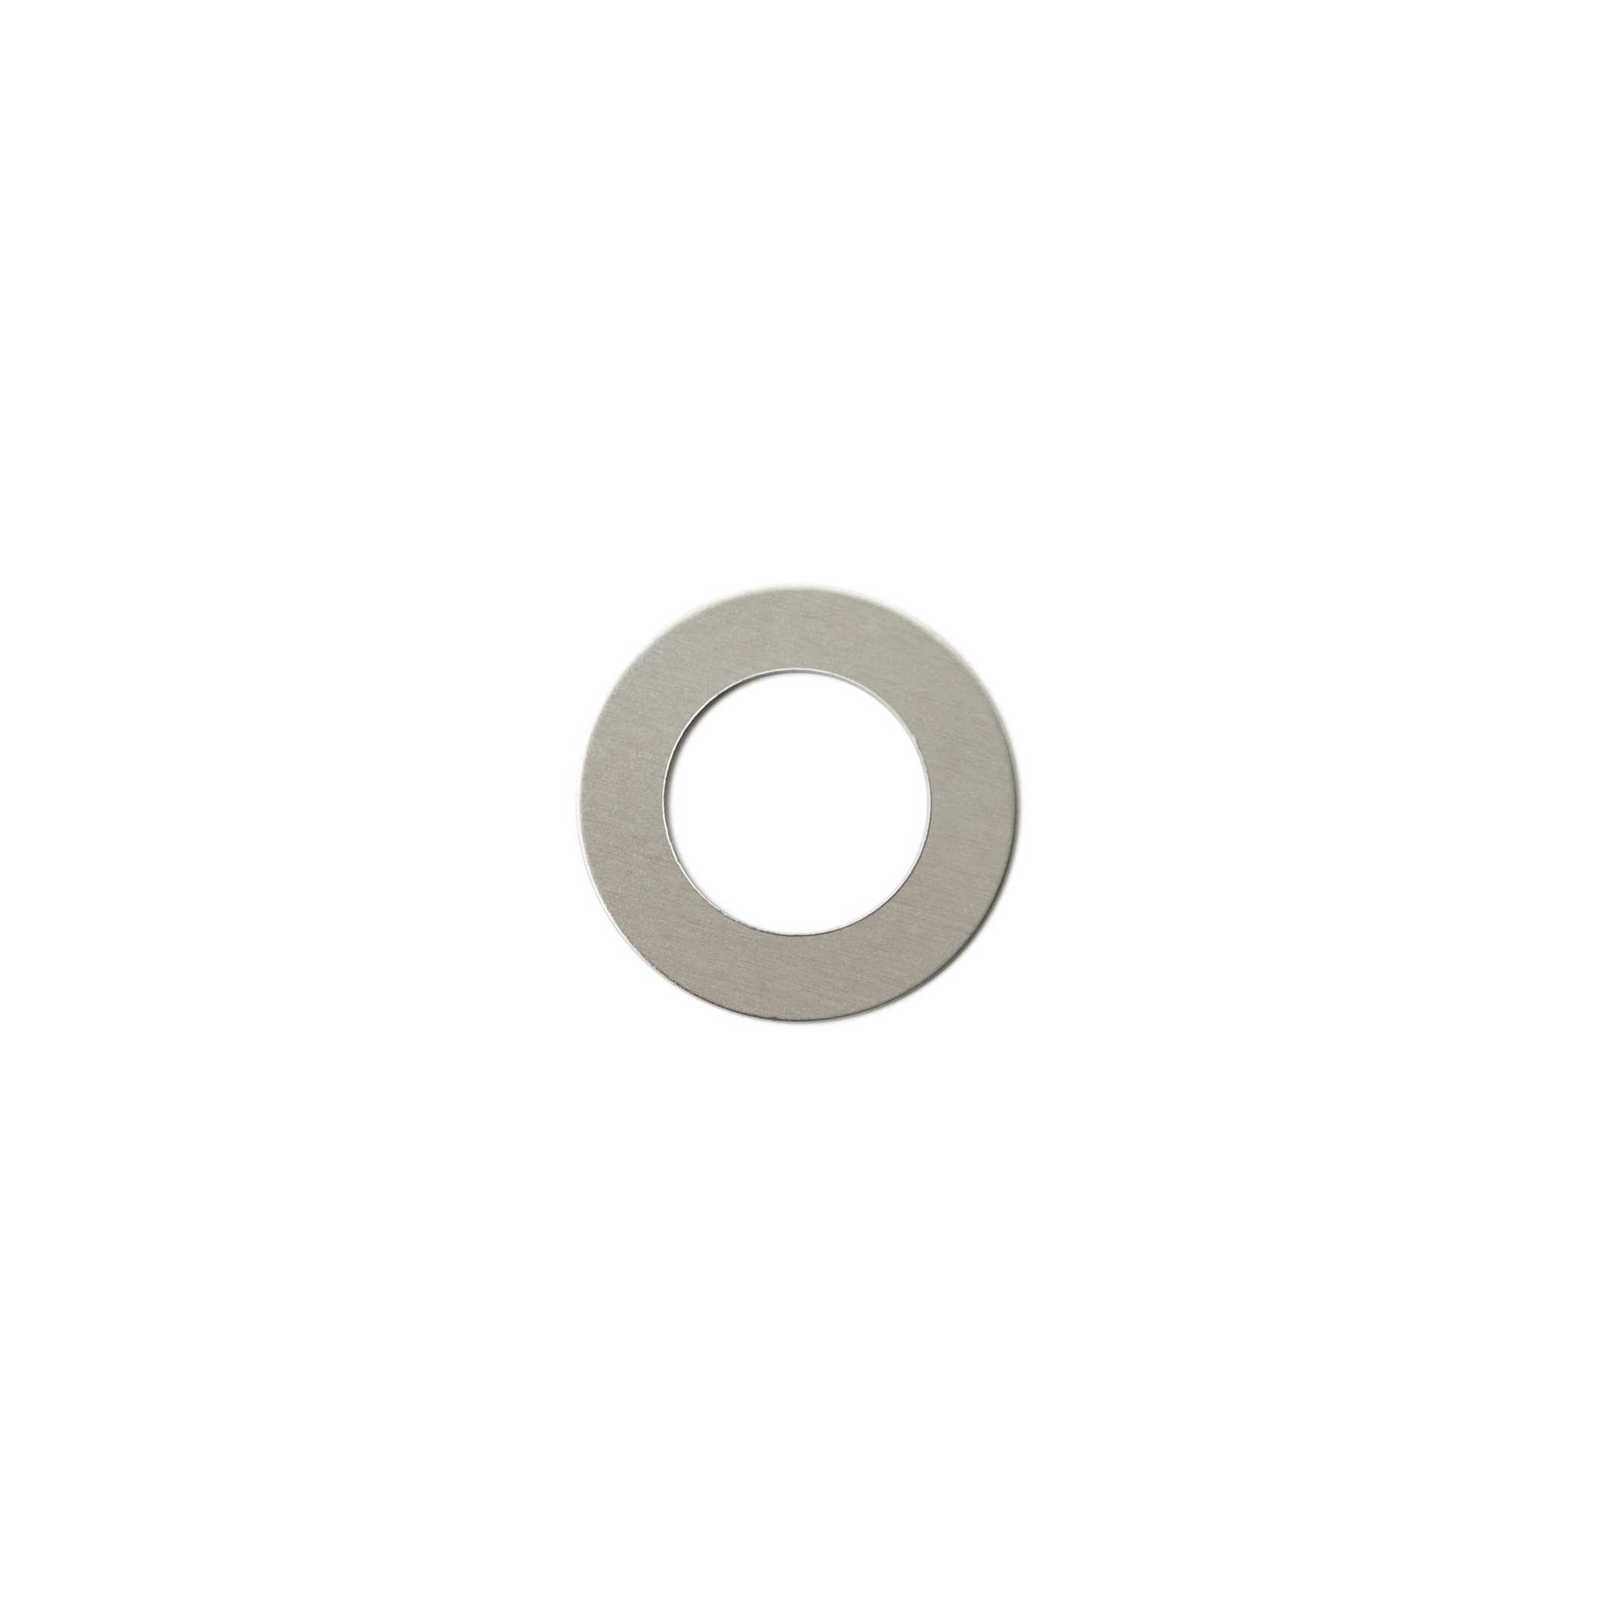 Ing Blanks, 1-1/4 Inch Round Washer With 3/4 Inch Center, Aluminum 0.063 Inch